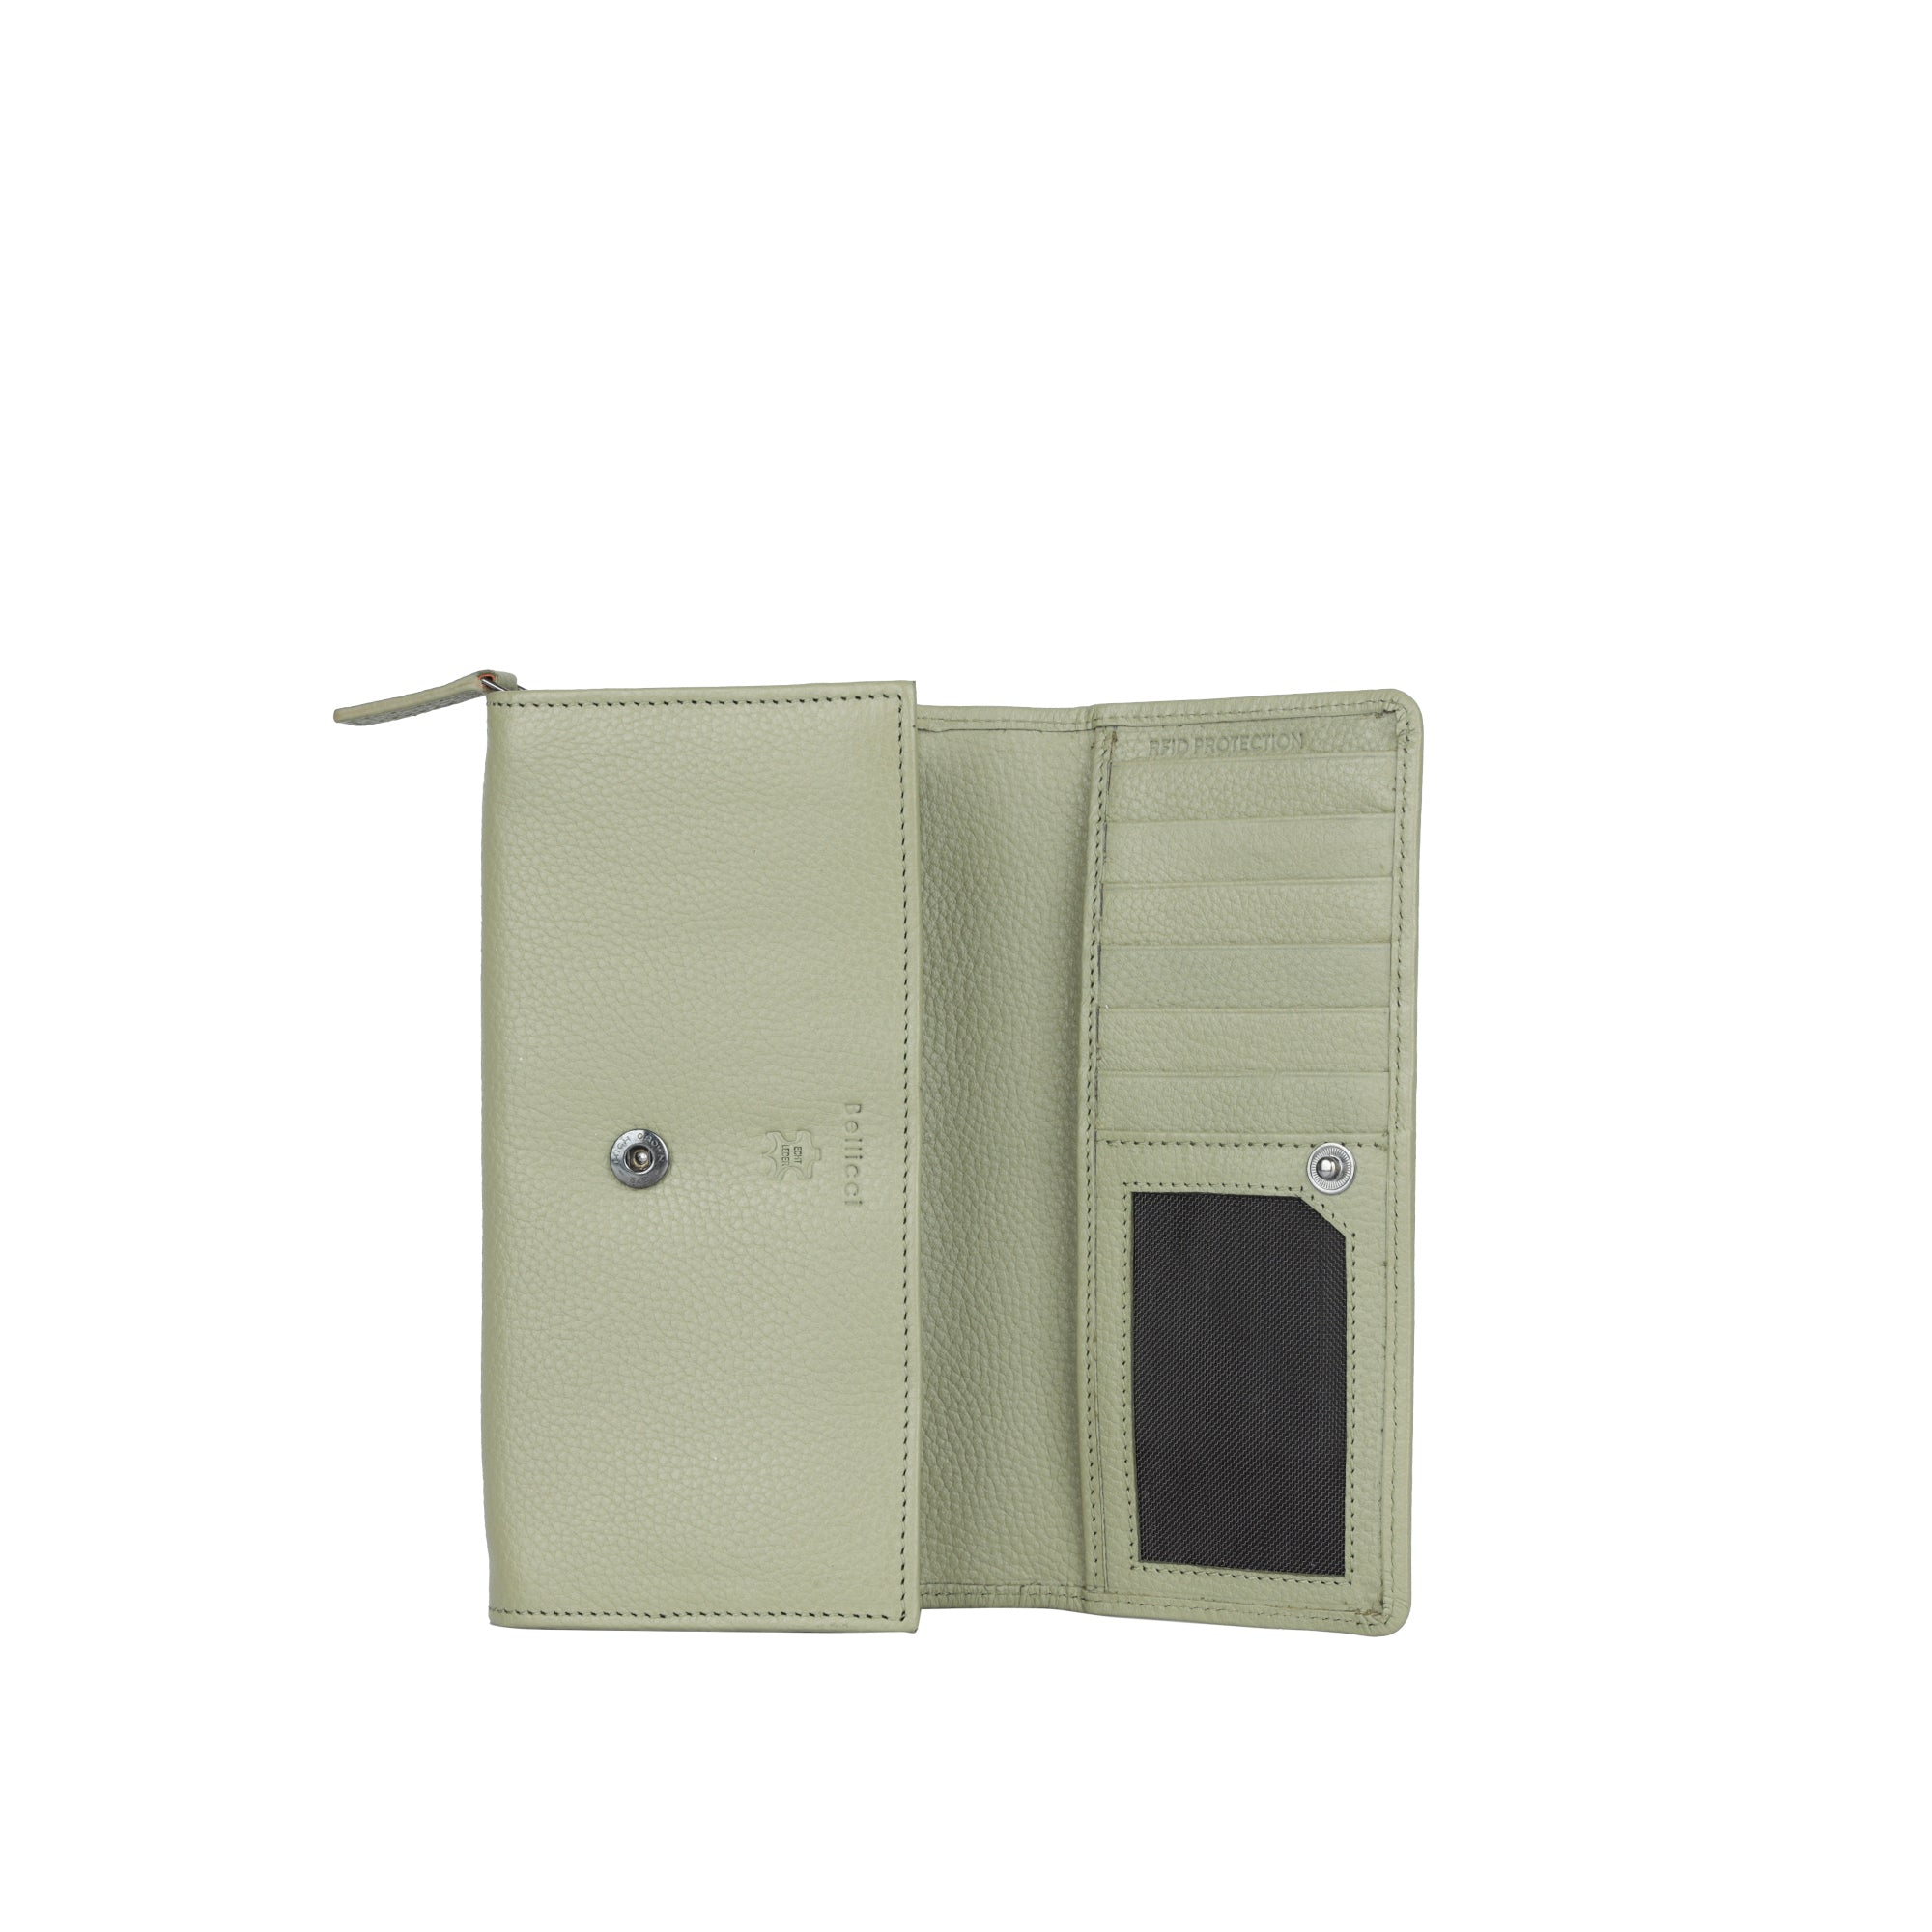 Alvina leather wallet